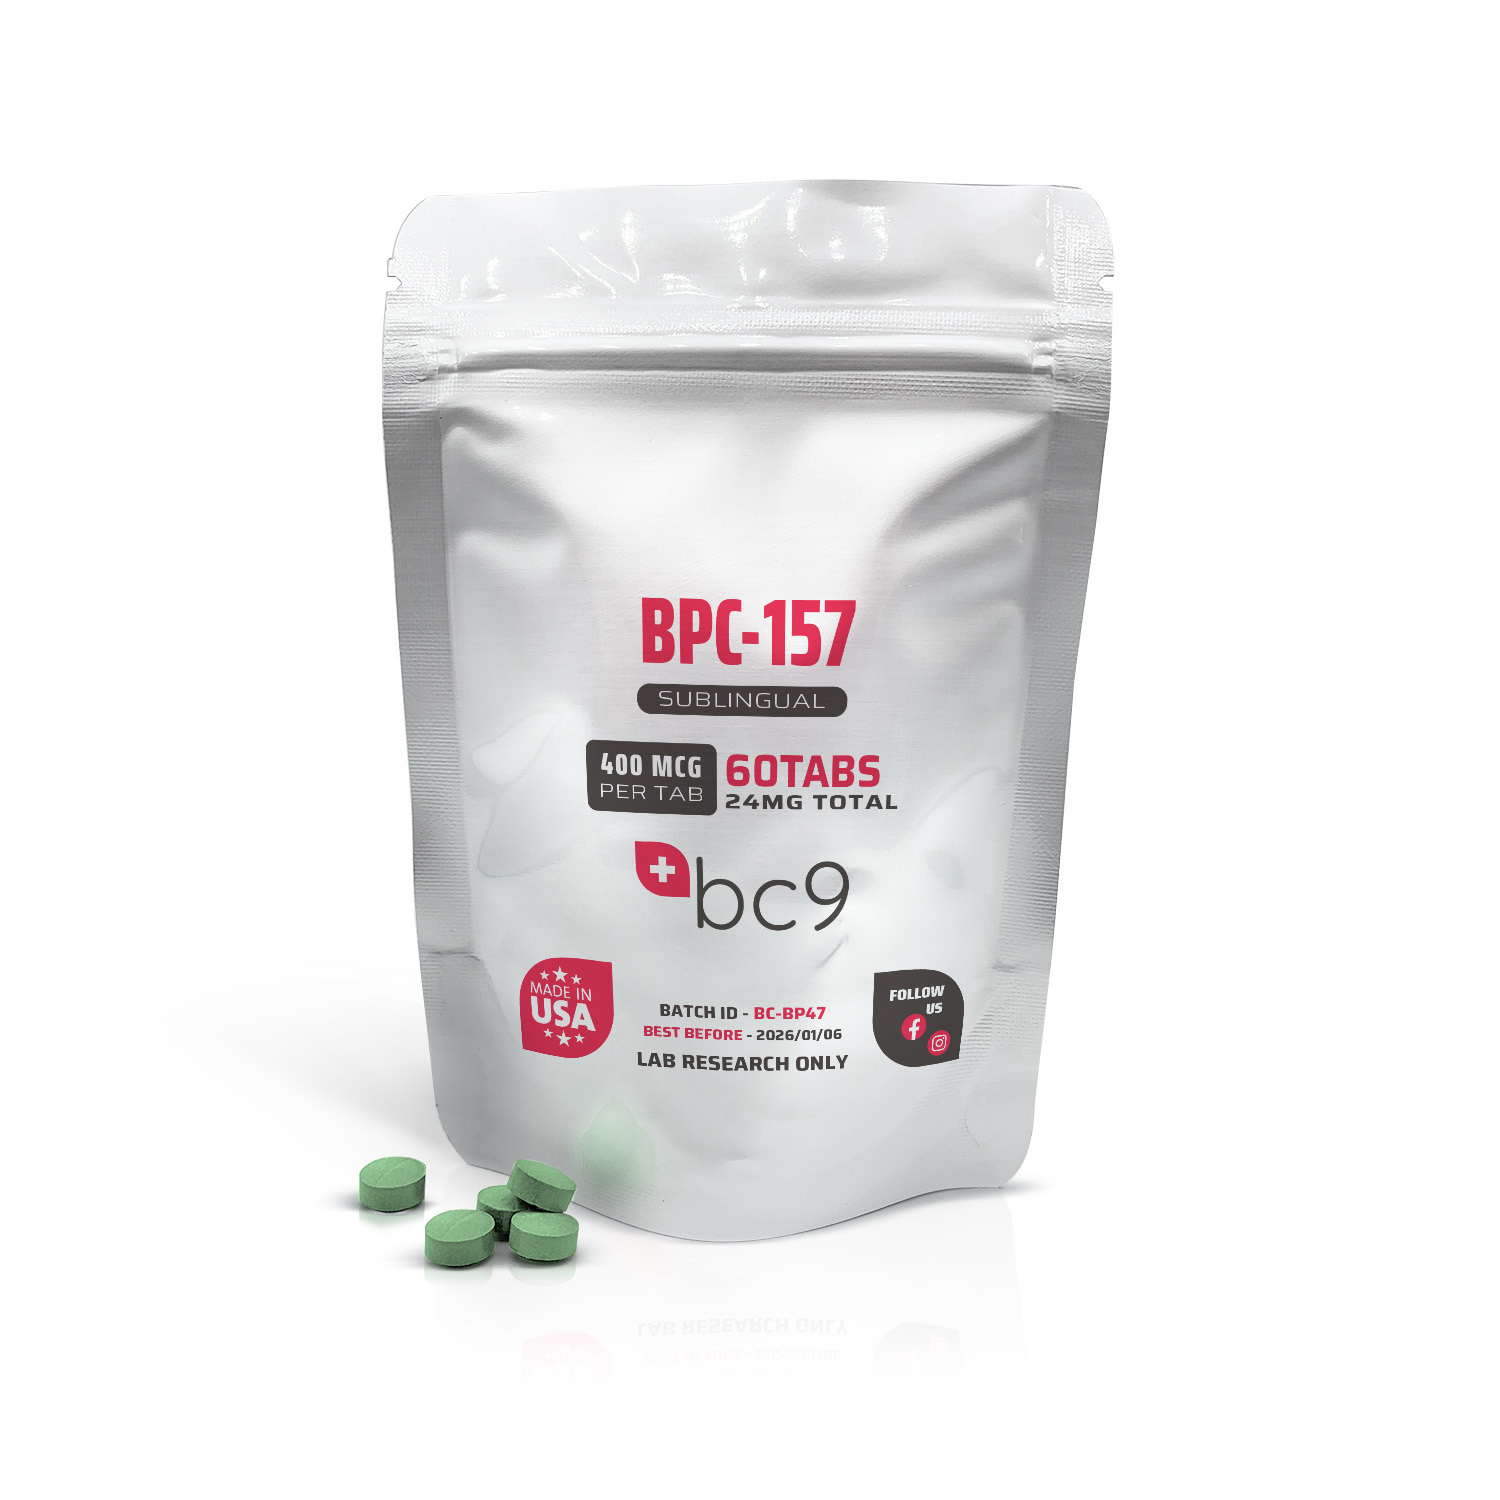 BPC-157 Sublingual Tablets For Sale | Fast Shipping | BC9.org